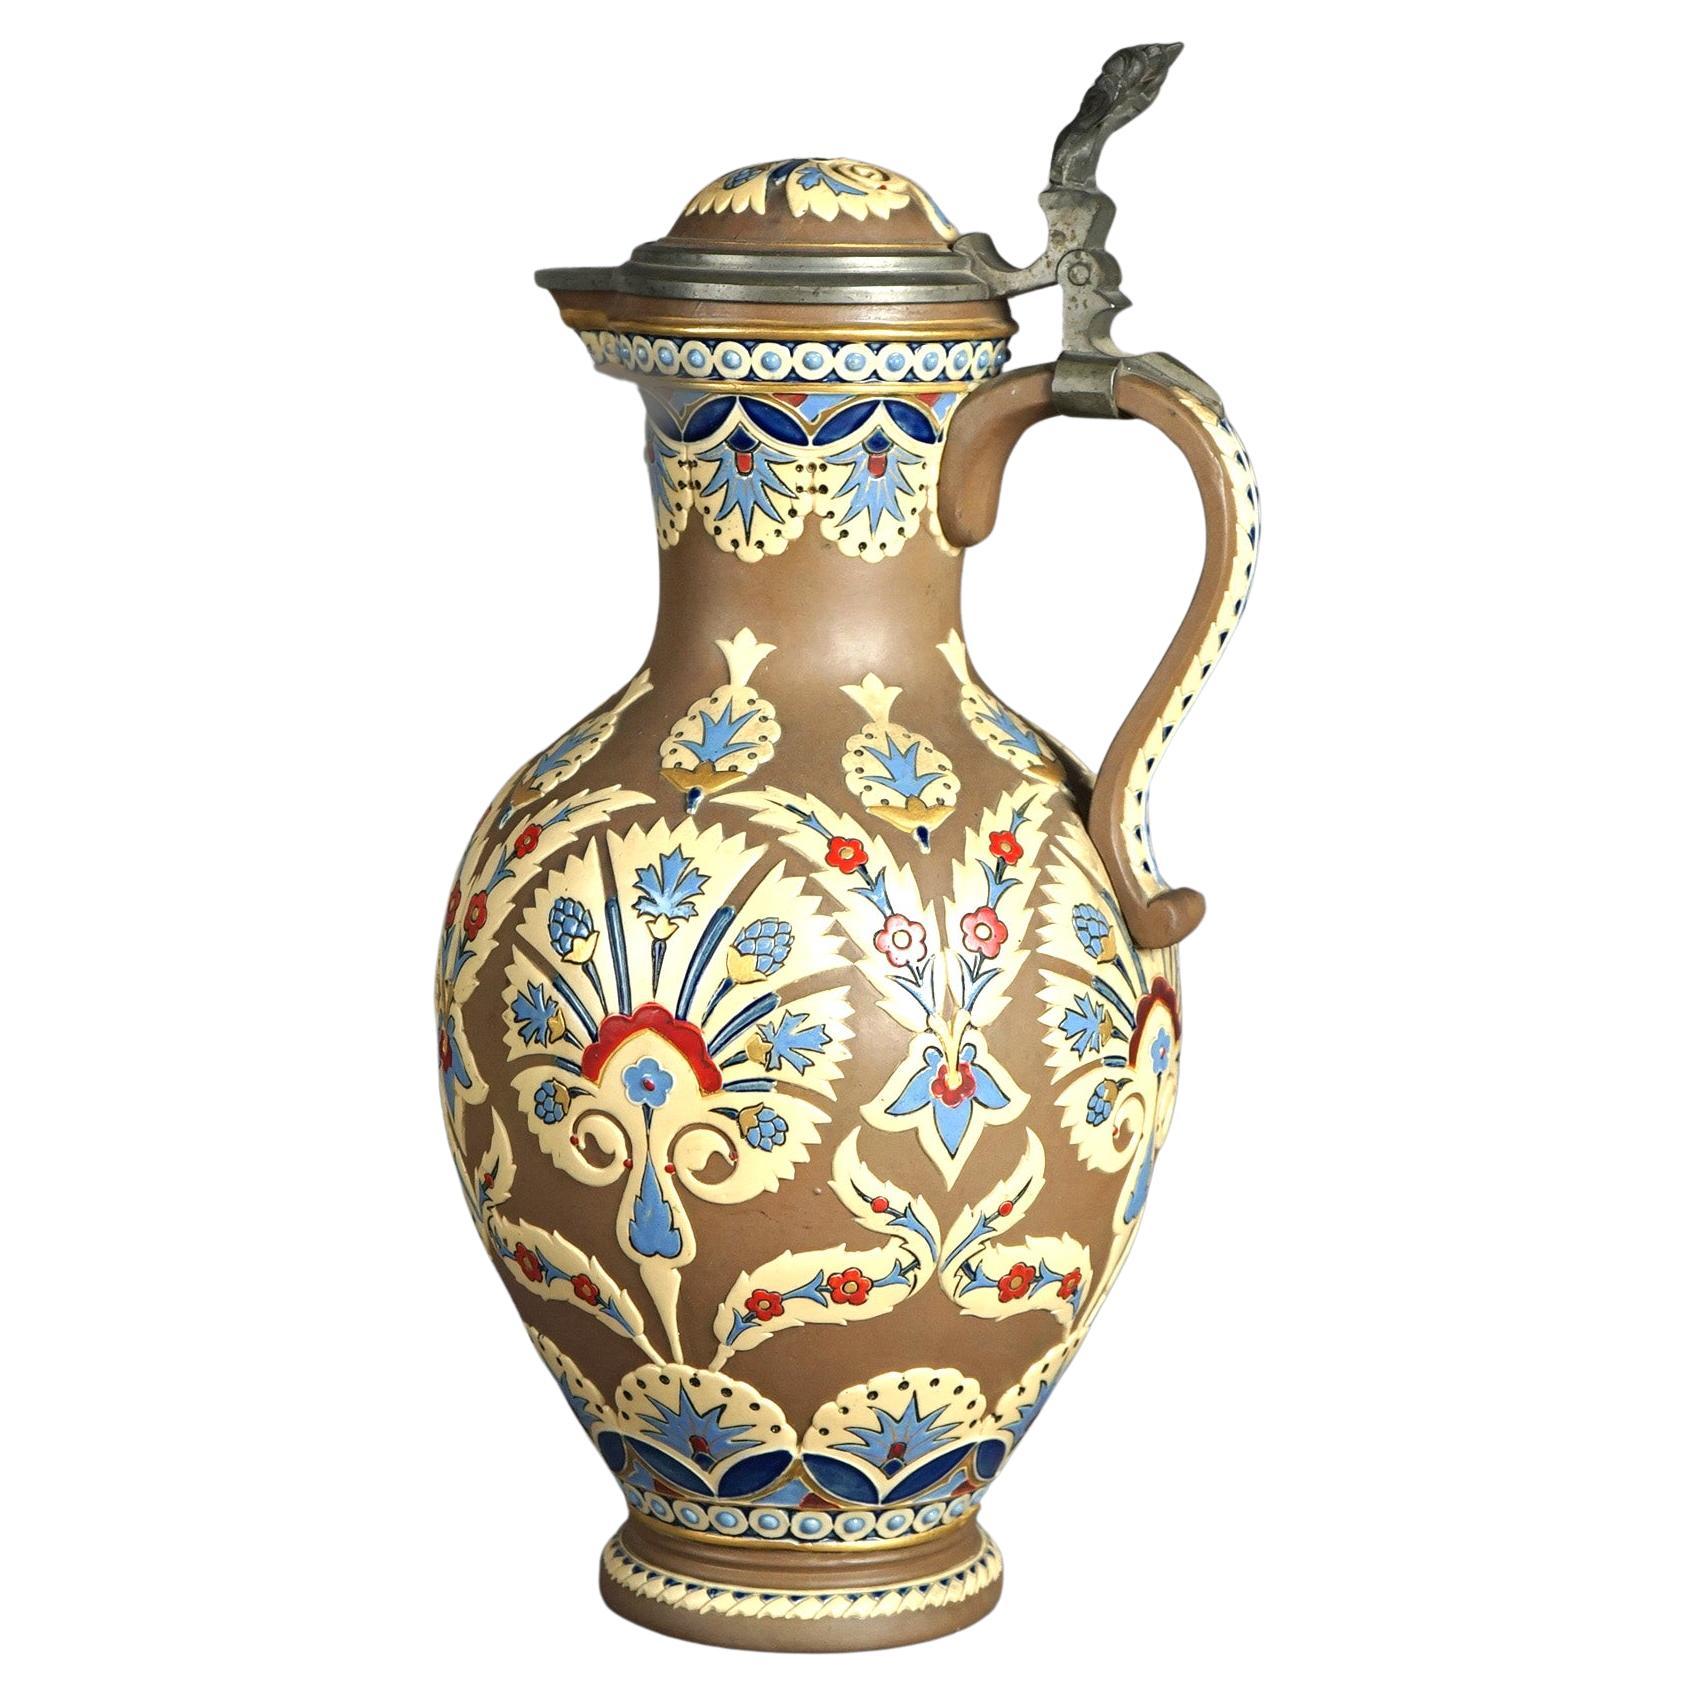 Antique Villeroy & Bach Aesthetic Pottery Pitcher with Stylized Flowers C1890 For Sale